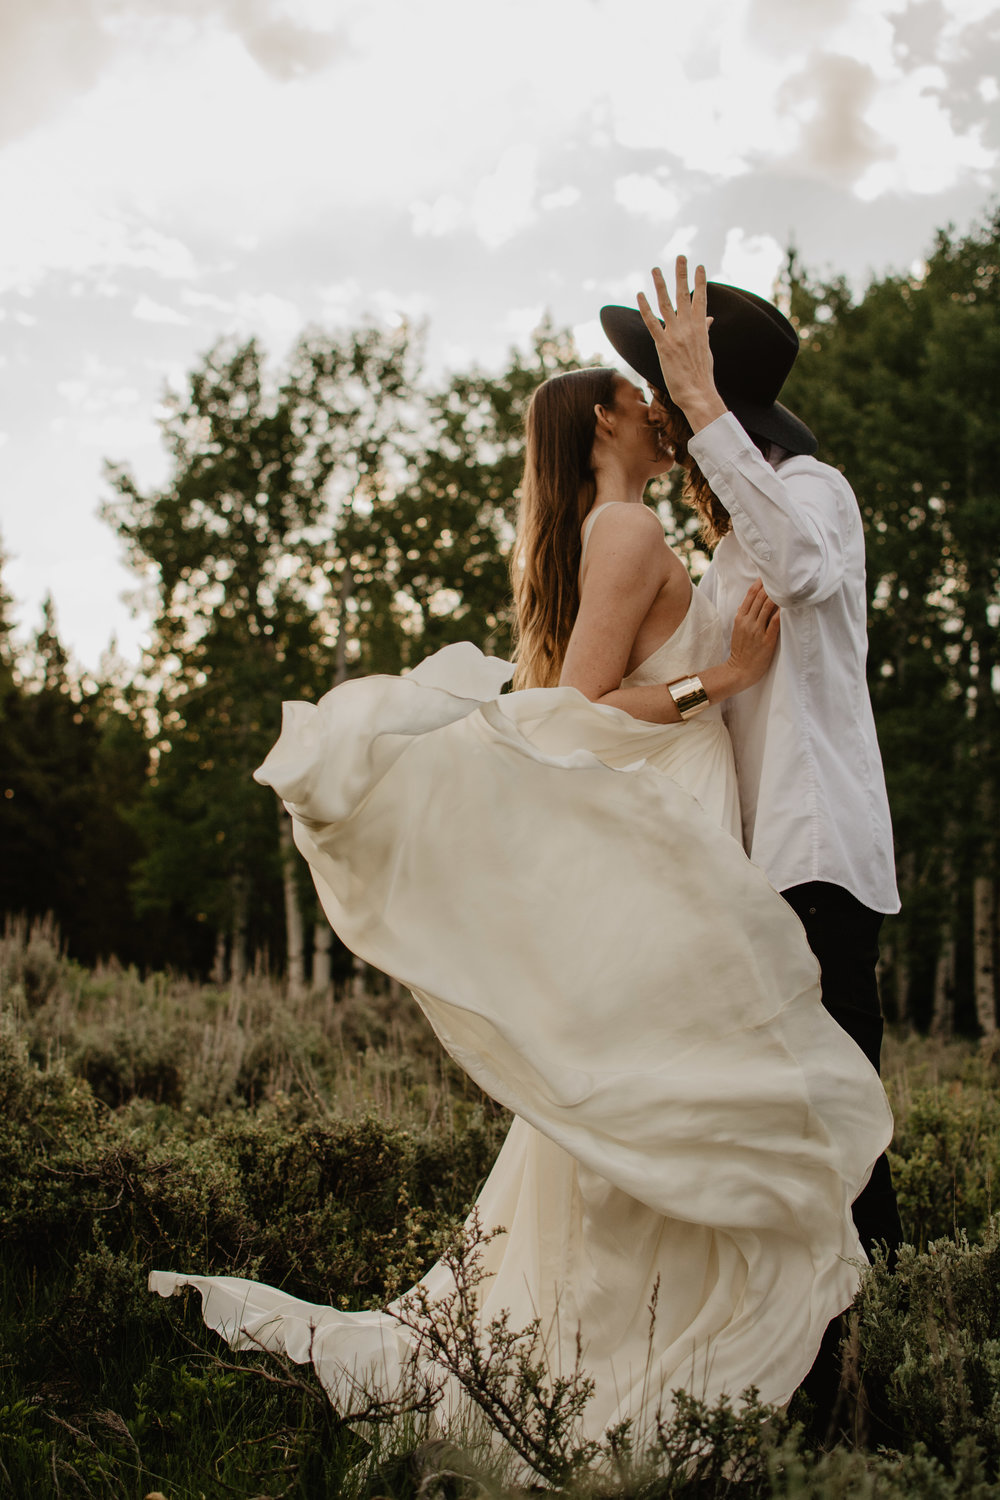 brides wedding dress flying in the wind as she kisses her groom for their Tetons bridals